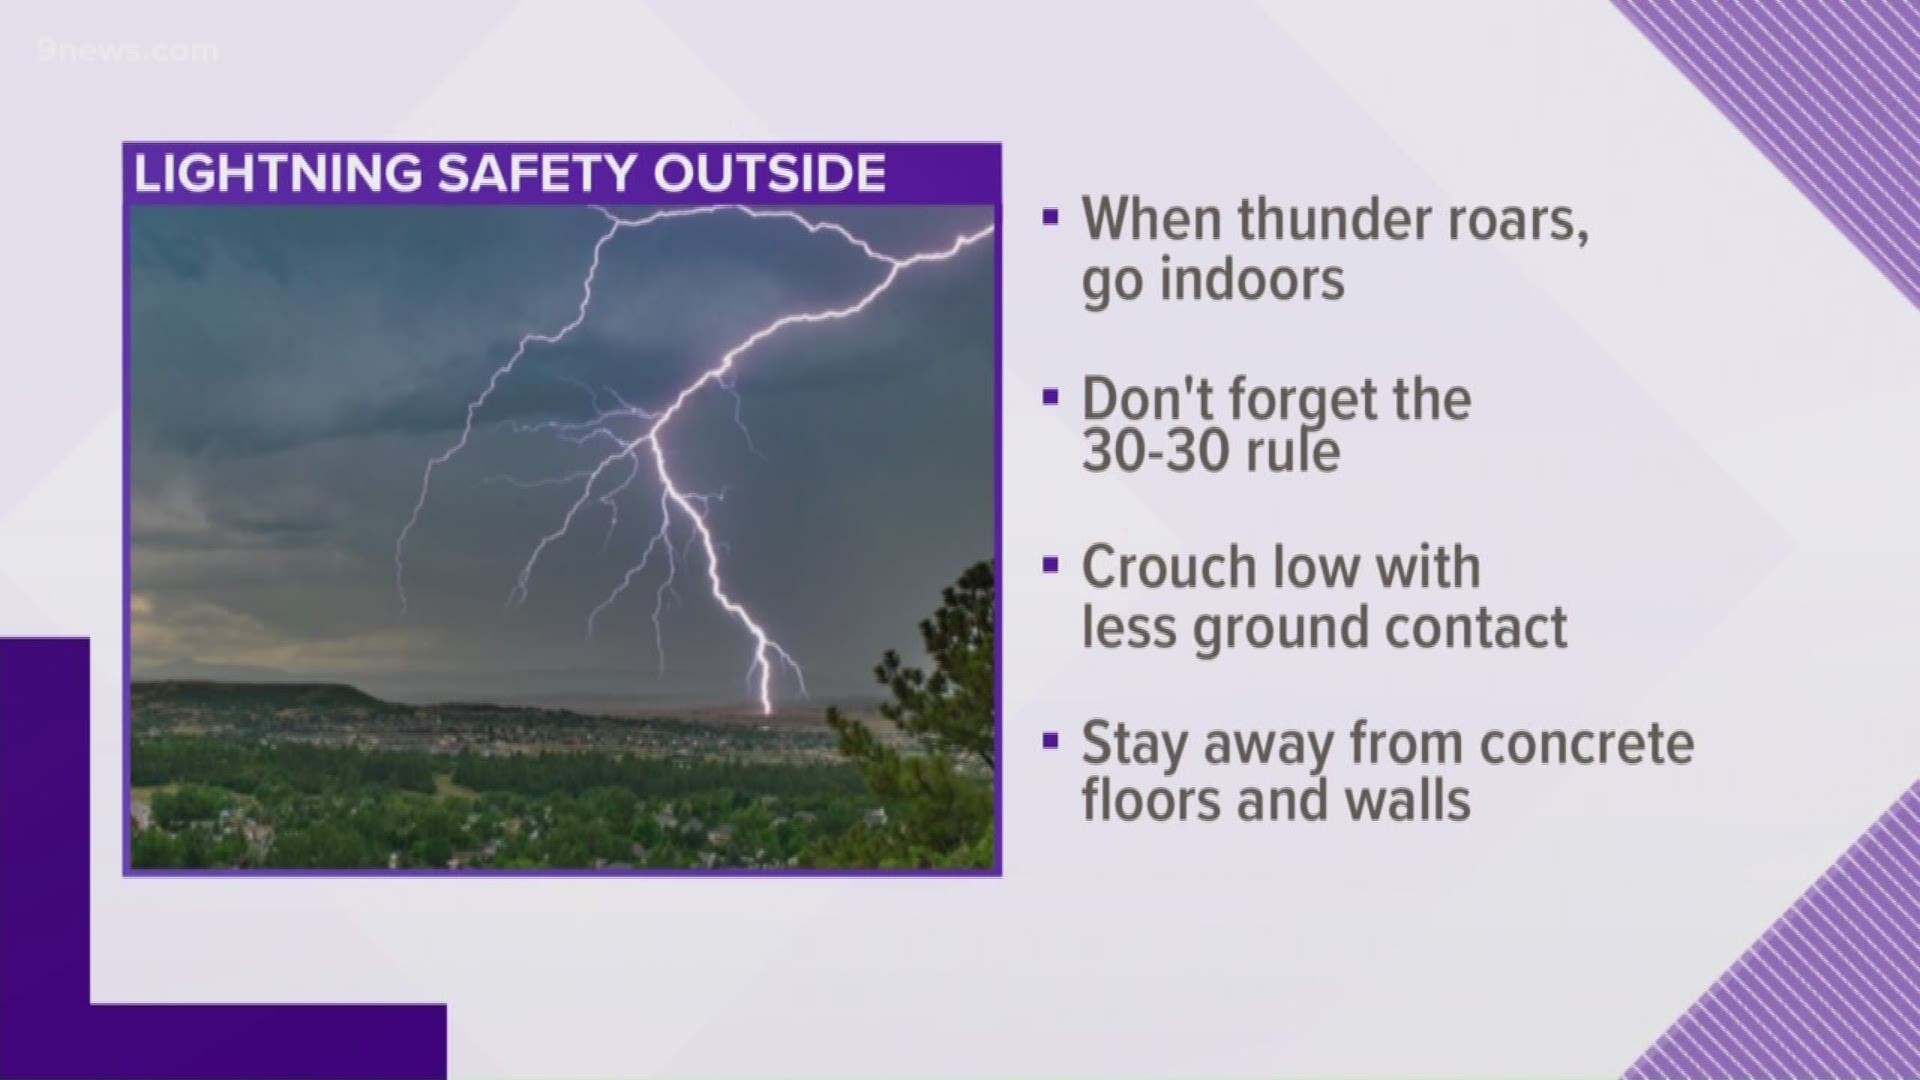 What to do during lightning storms: Tips for indoor and outdoor safety